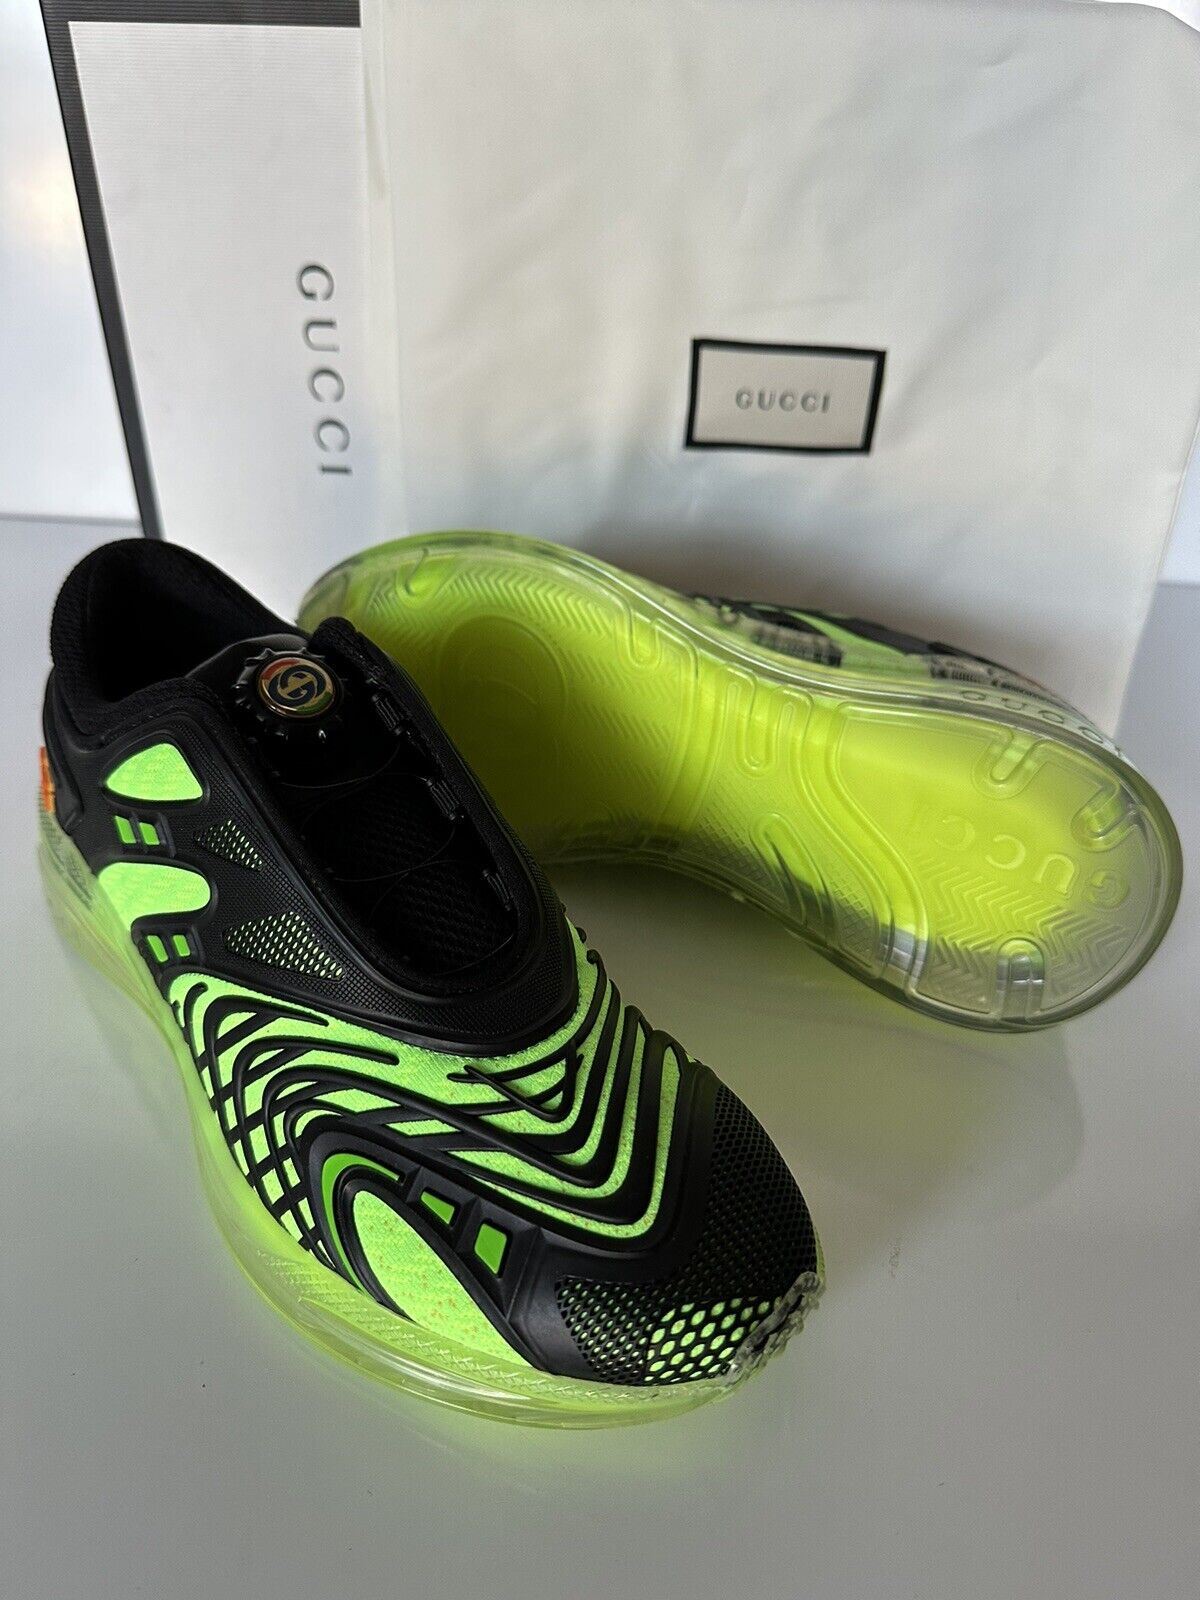 NIB Gucci Ultrapace R Sneakers In Black and Green 8 US (Gucci 7.5) 620337 IT